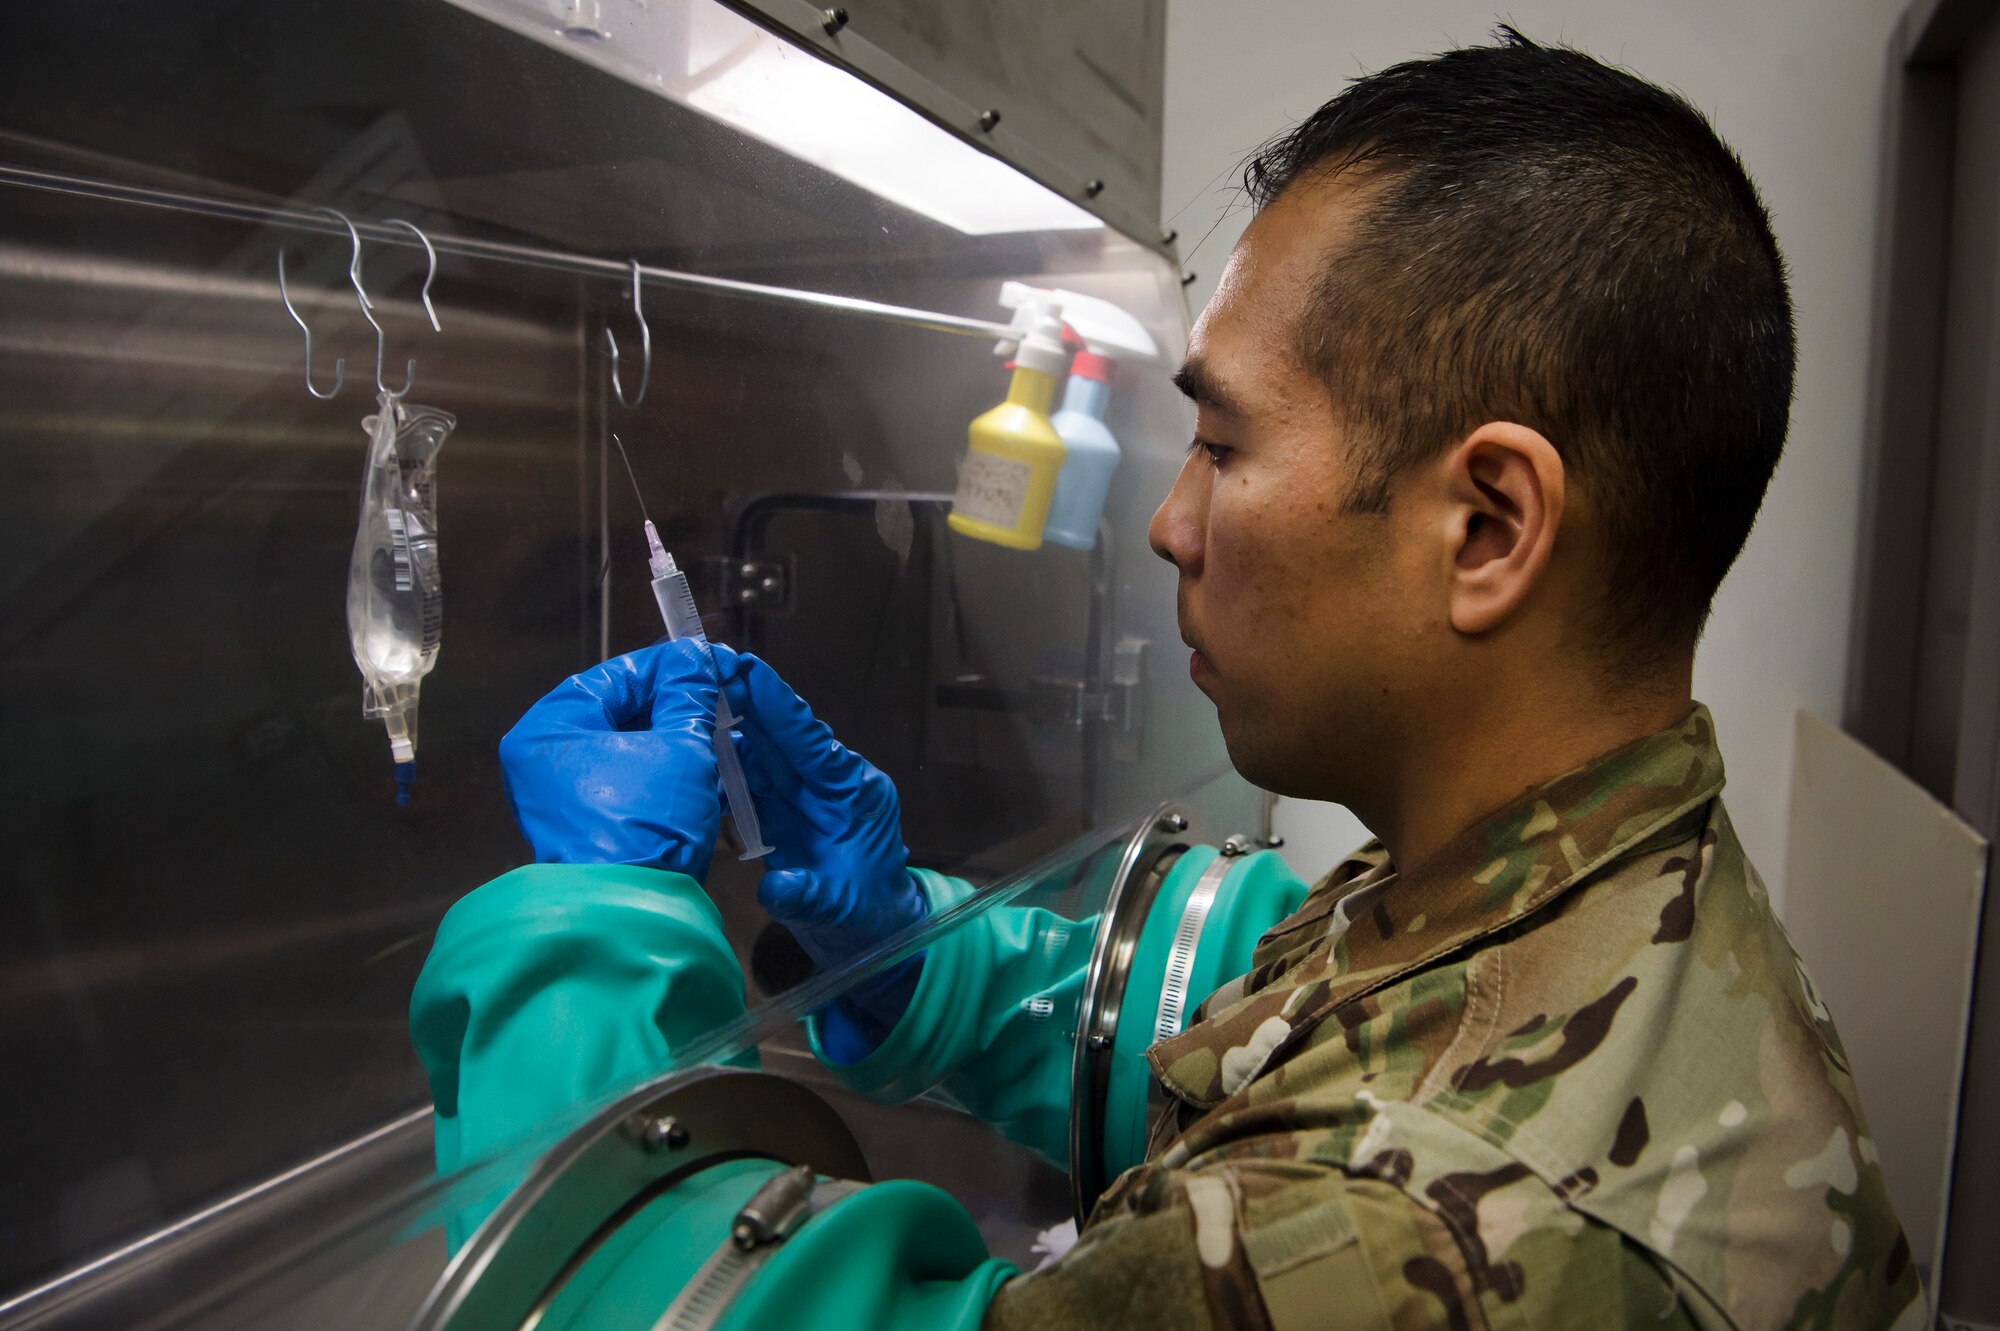 U.S. Air Force Tech. Sgt. Thoney Douangnoy (left), 379th Expeditionary Medical Group pharmacy operations NCO in charge, prepares compounded intravenous medications in the pharmacy at Al Udeid Air Base, Qatar, Jan. 15, 2019. Airmen prepare compounded IV medications for inpatient and air-evacuated patients, with the practice performed in an IV hood to ensure product sterility. (U.S. Air Force photo by Tech. Sgt. Christopher Hubenthal)